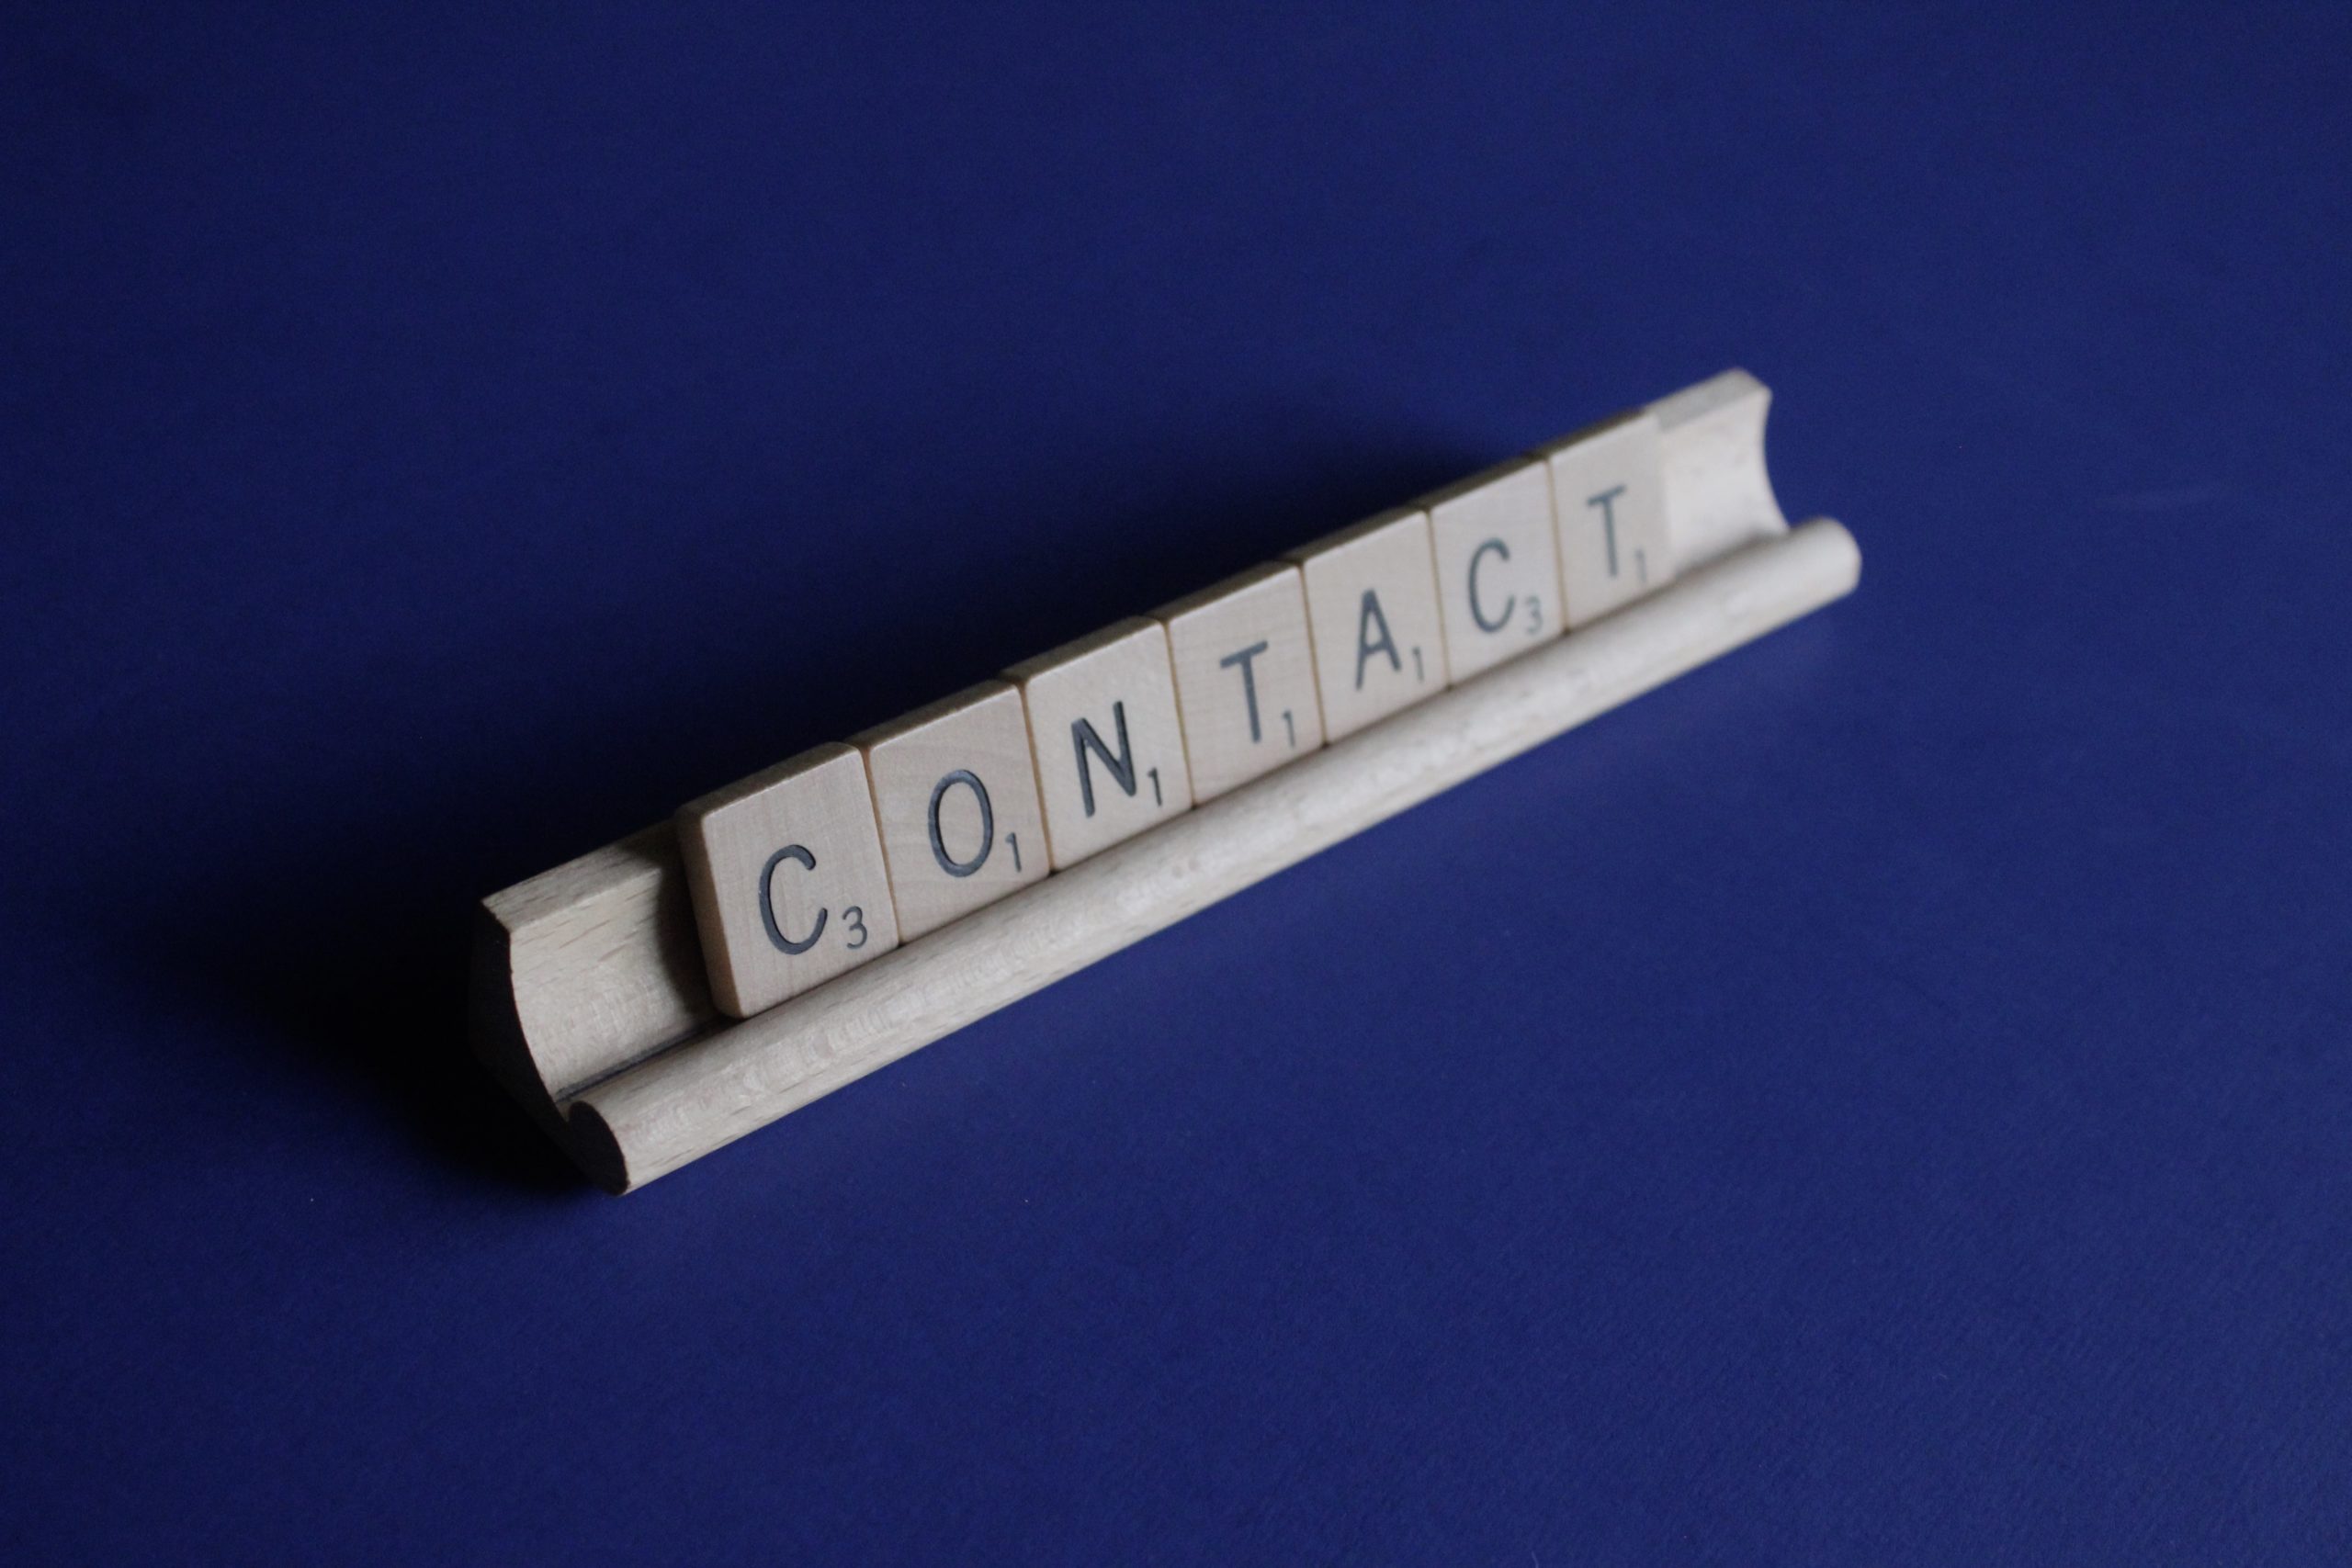 Scrabble letters spelling "contact"